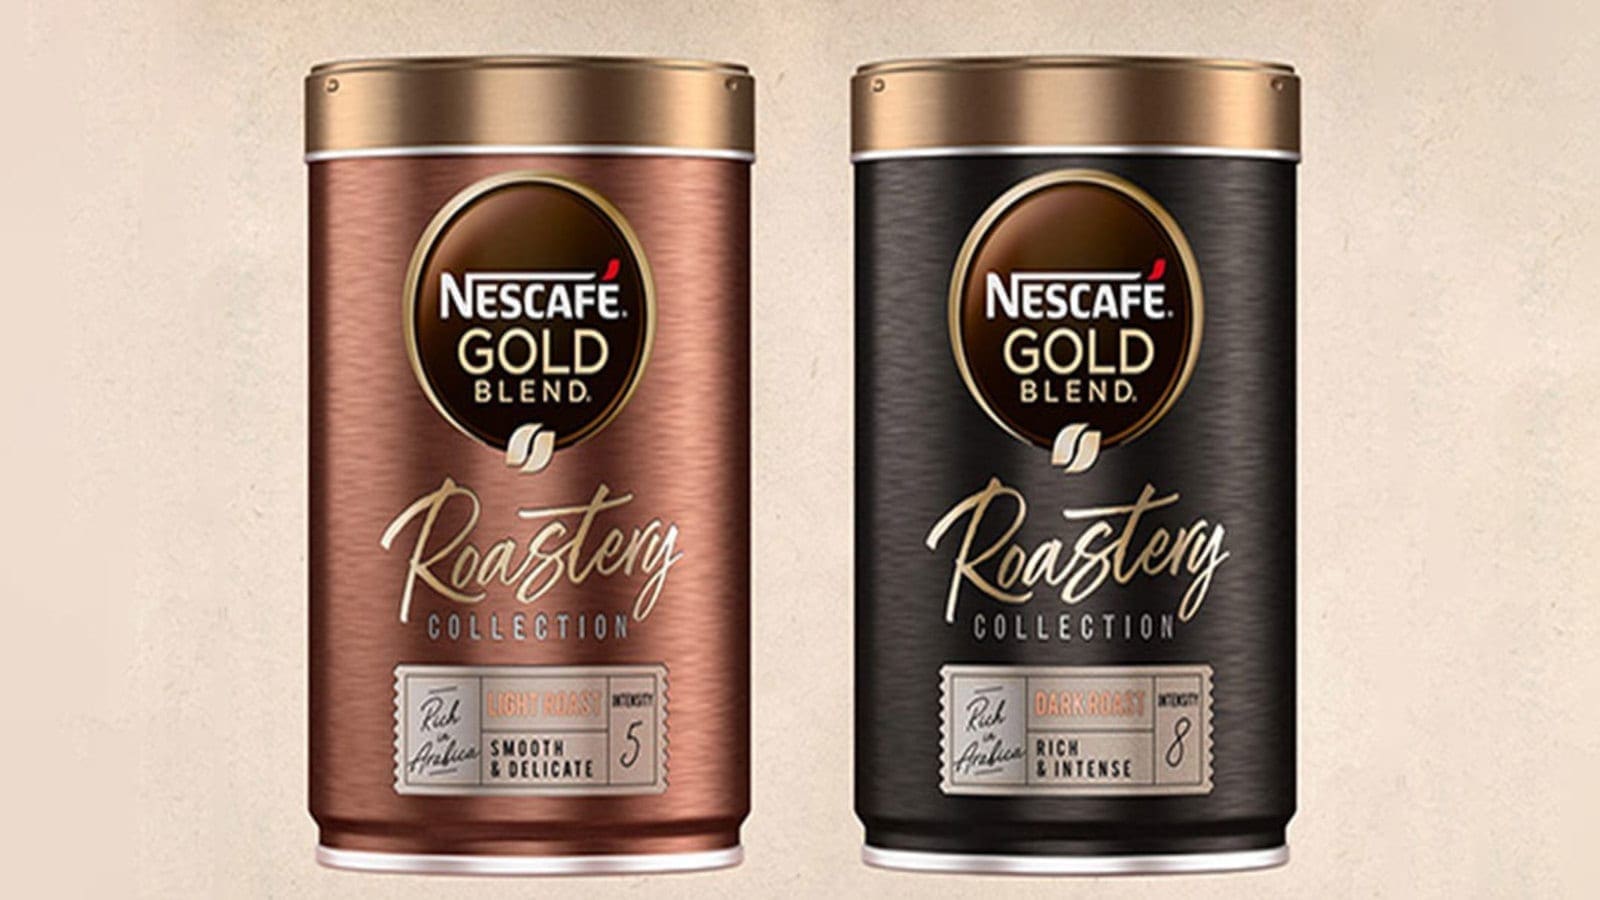 Egypt shuts down facility believed to be producing counterfeit Nescafe coffee products